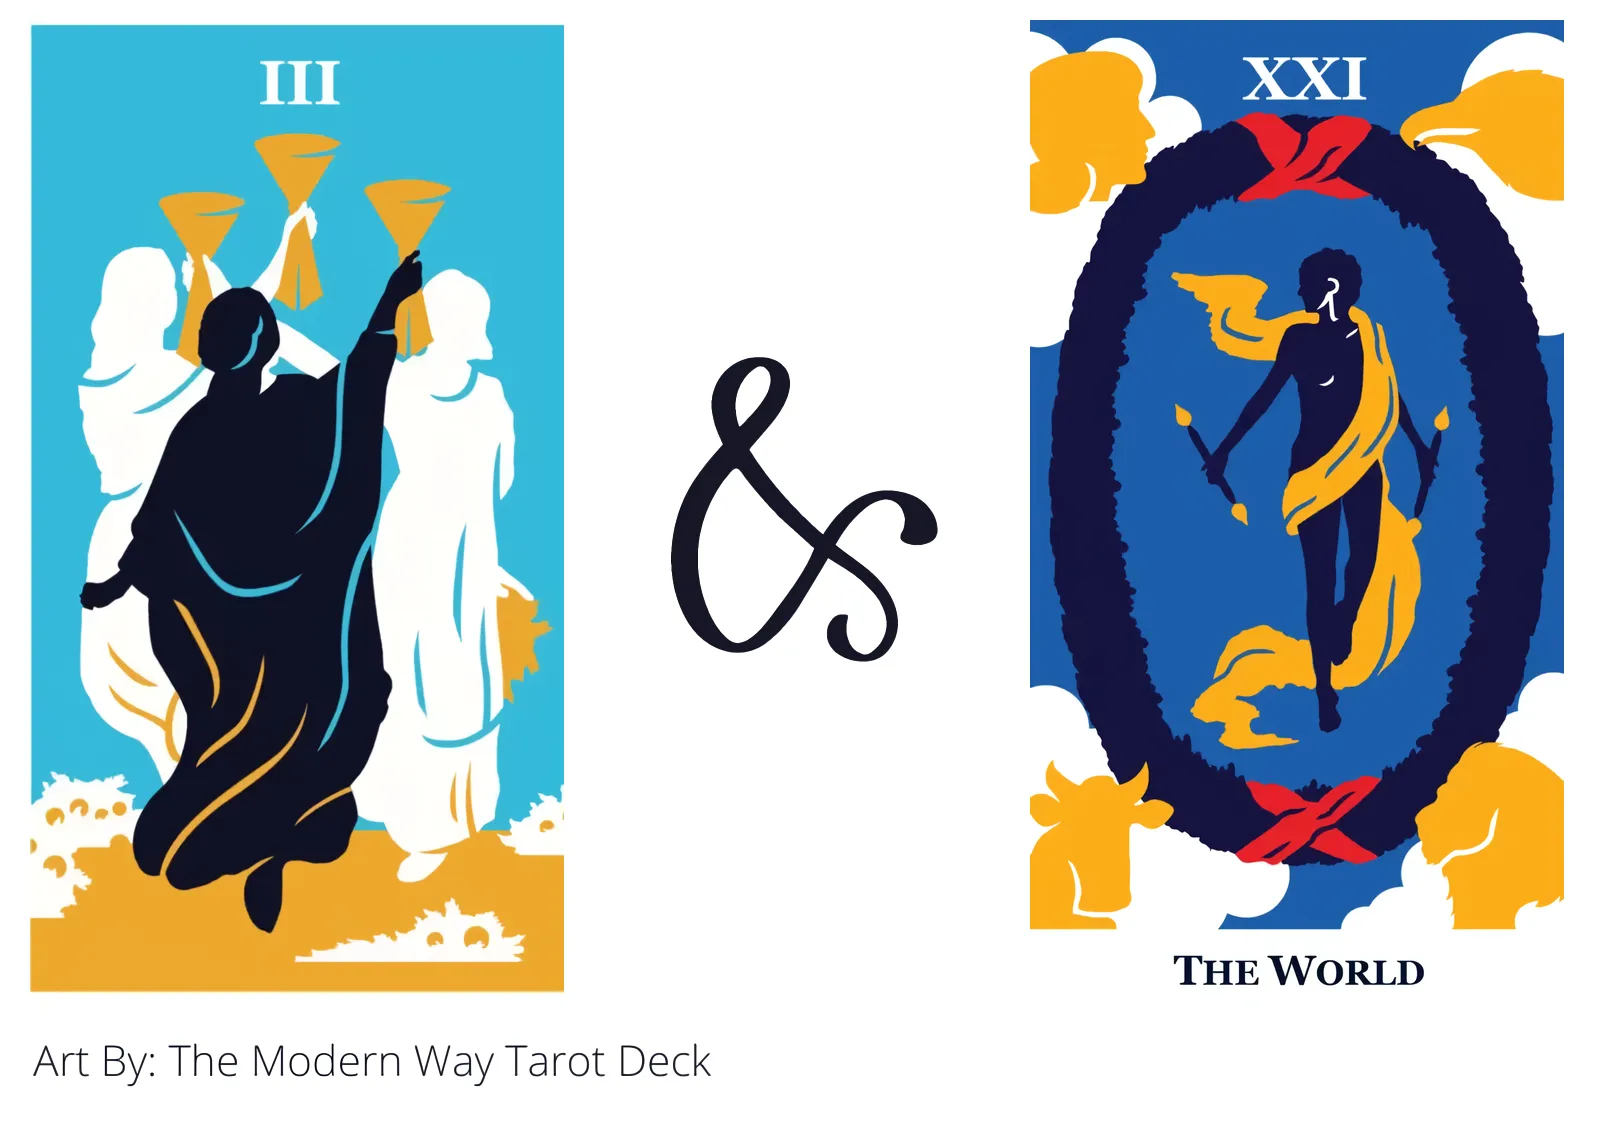 three of cups and the world tarot cards together